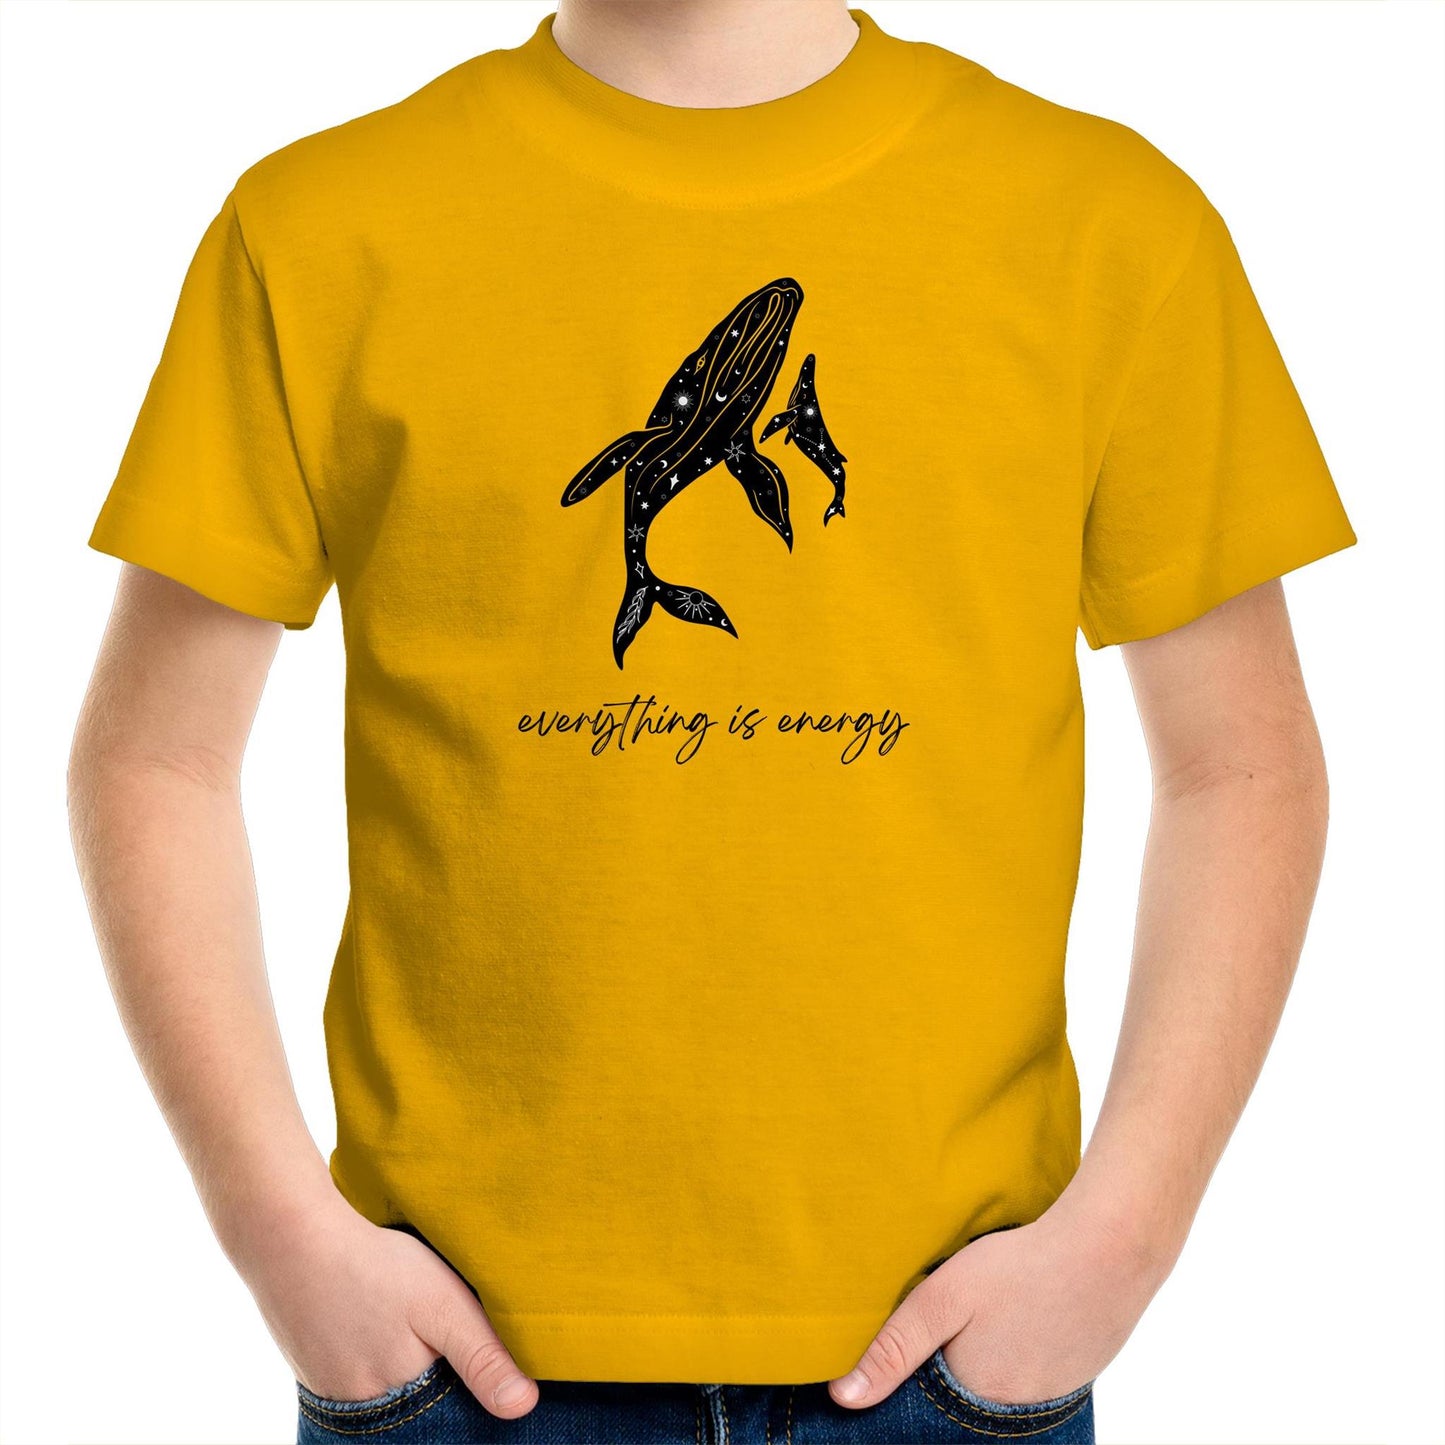 Current Mood 'EVERYTHING IS ENERGY' Youth Tee